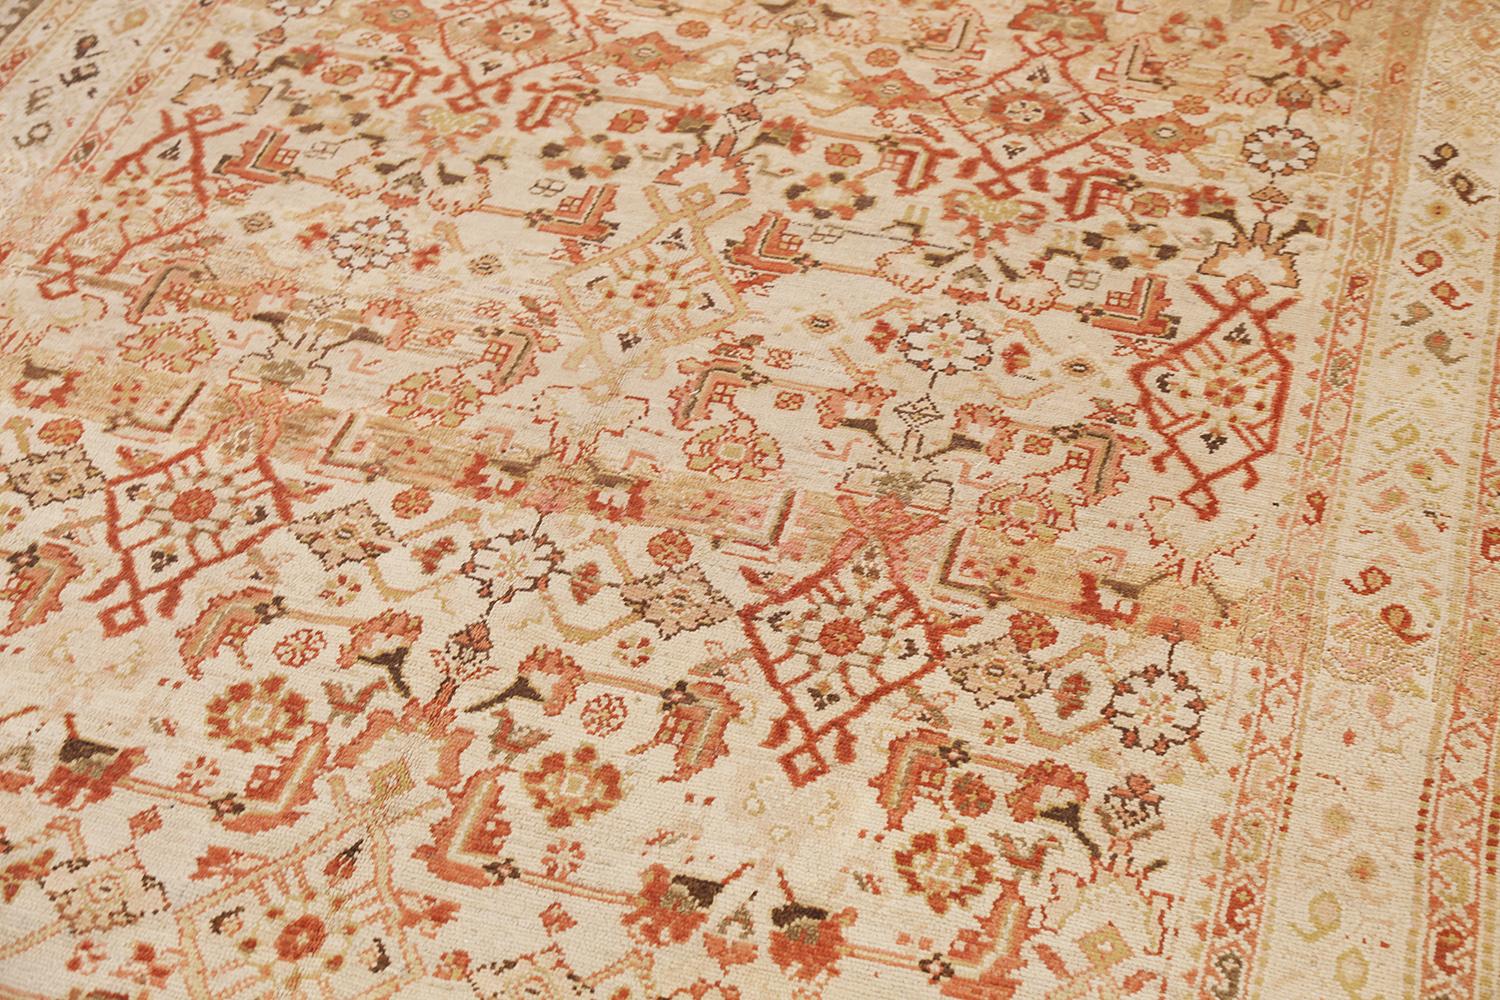 Antique Persian Malayer Rug with Red and Beige Floral Details on Ivory Field In Excellent Condition For Sale In Dallas, TX